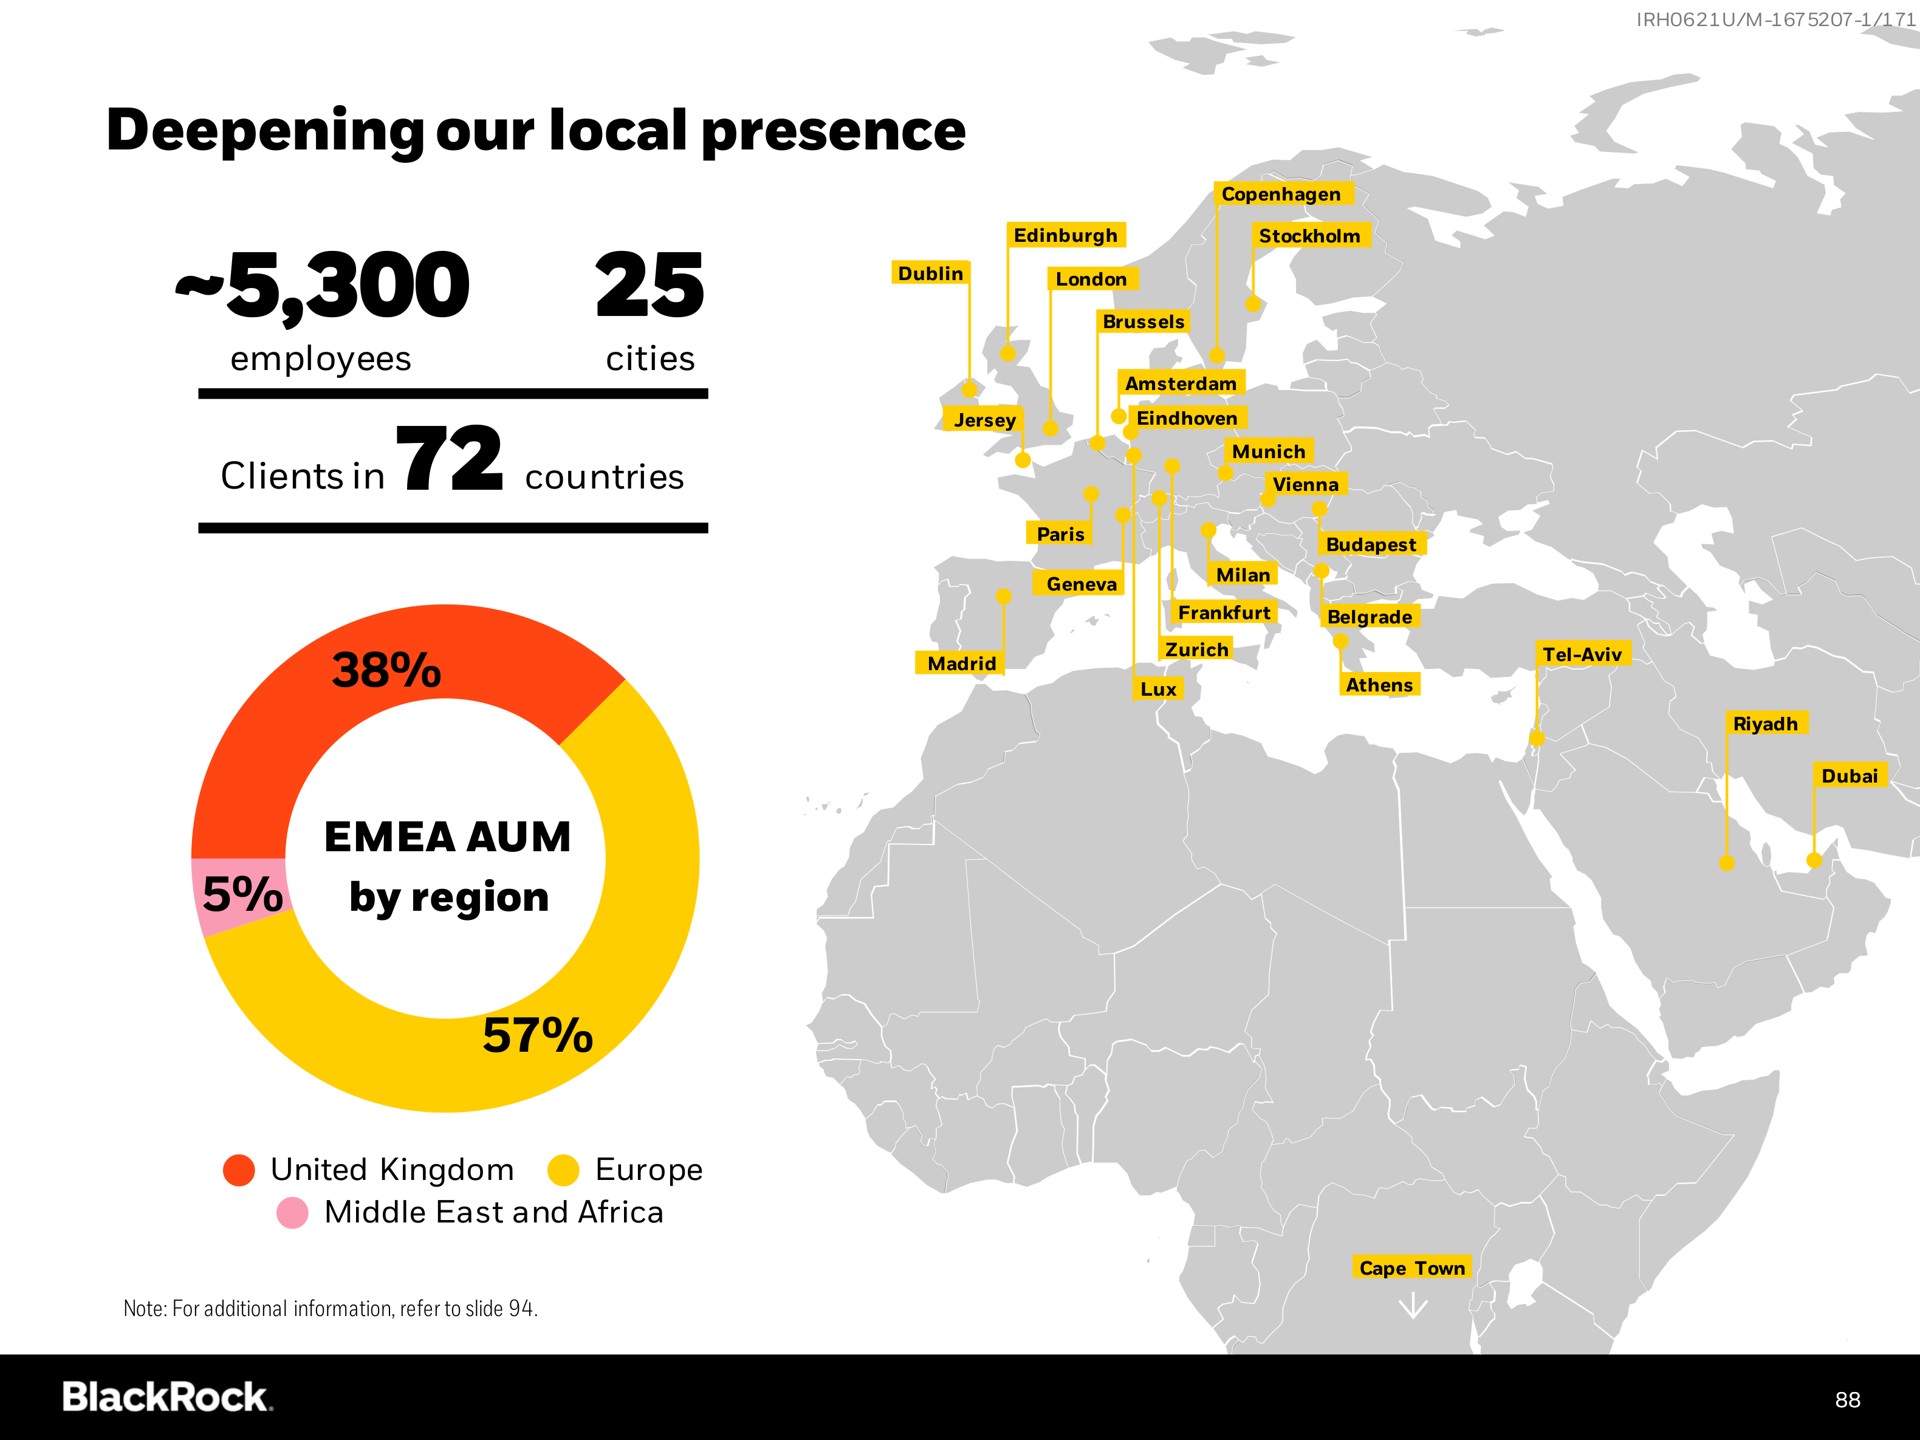 deepening our local presence | BlackRock